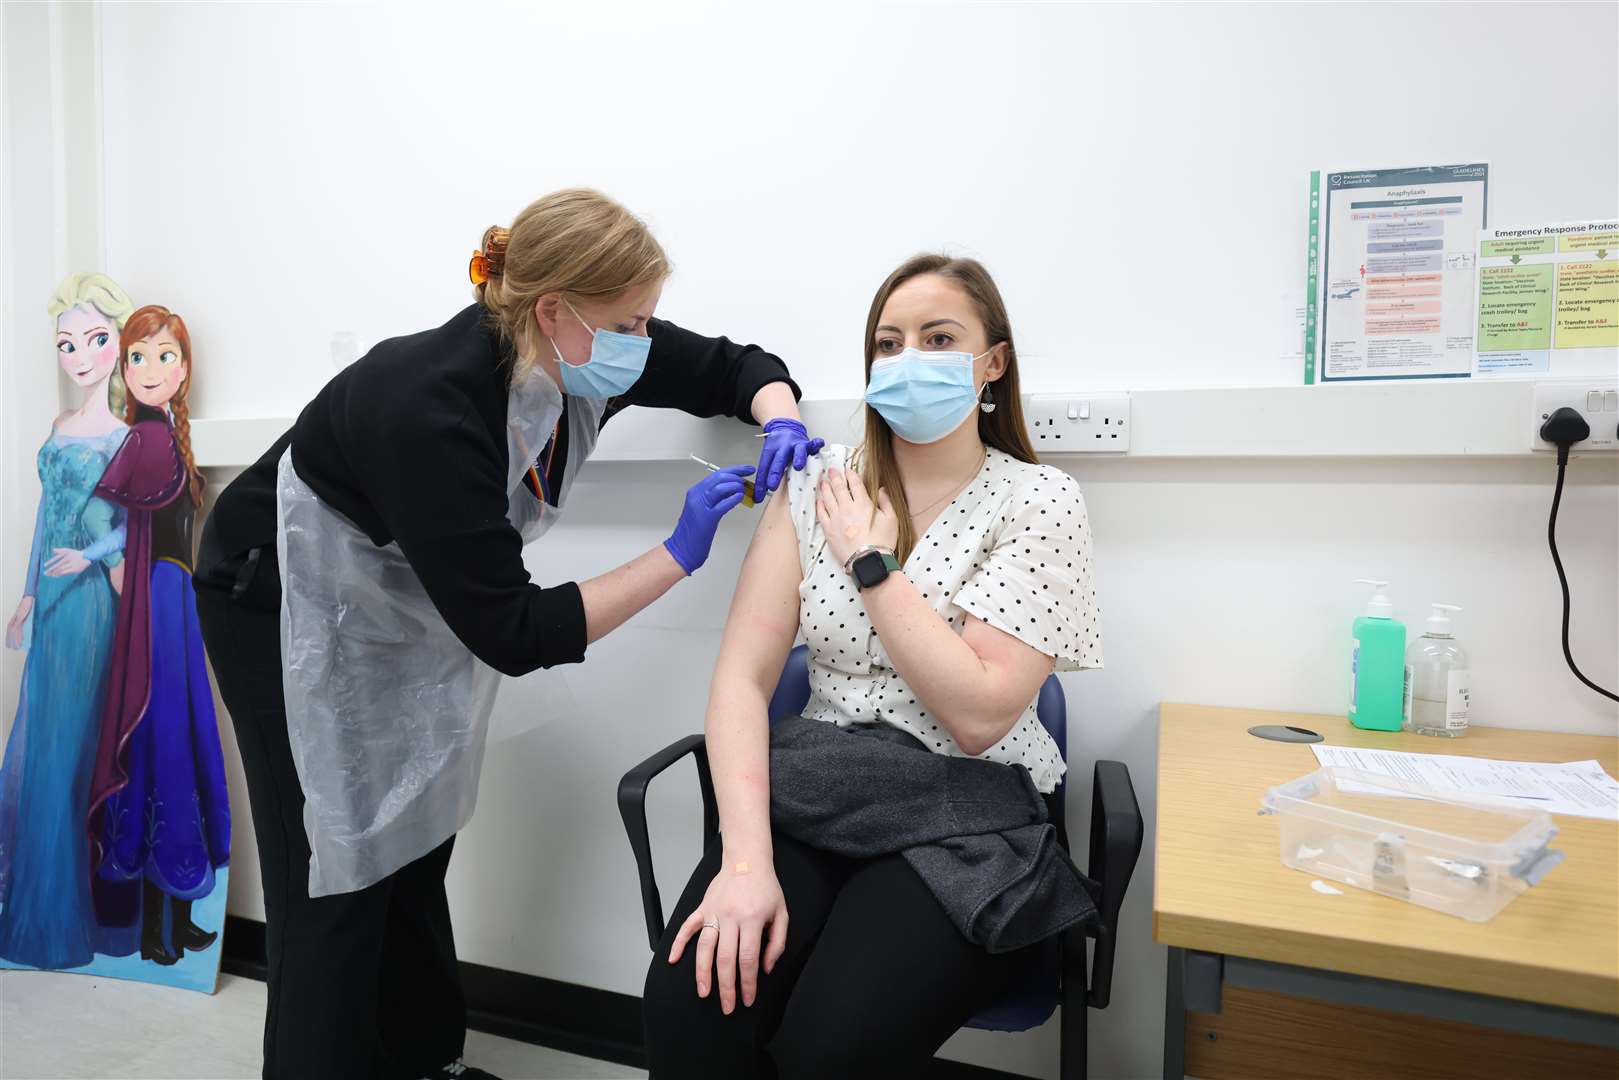 A new Moderna coronavirus booster jab has been approved for use on people aged over 18 in the UK (James Manning/PA)